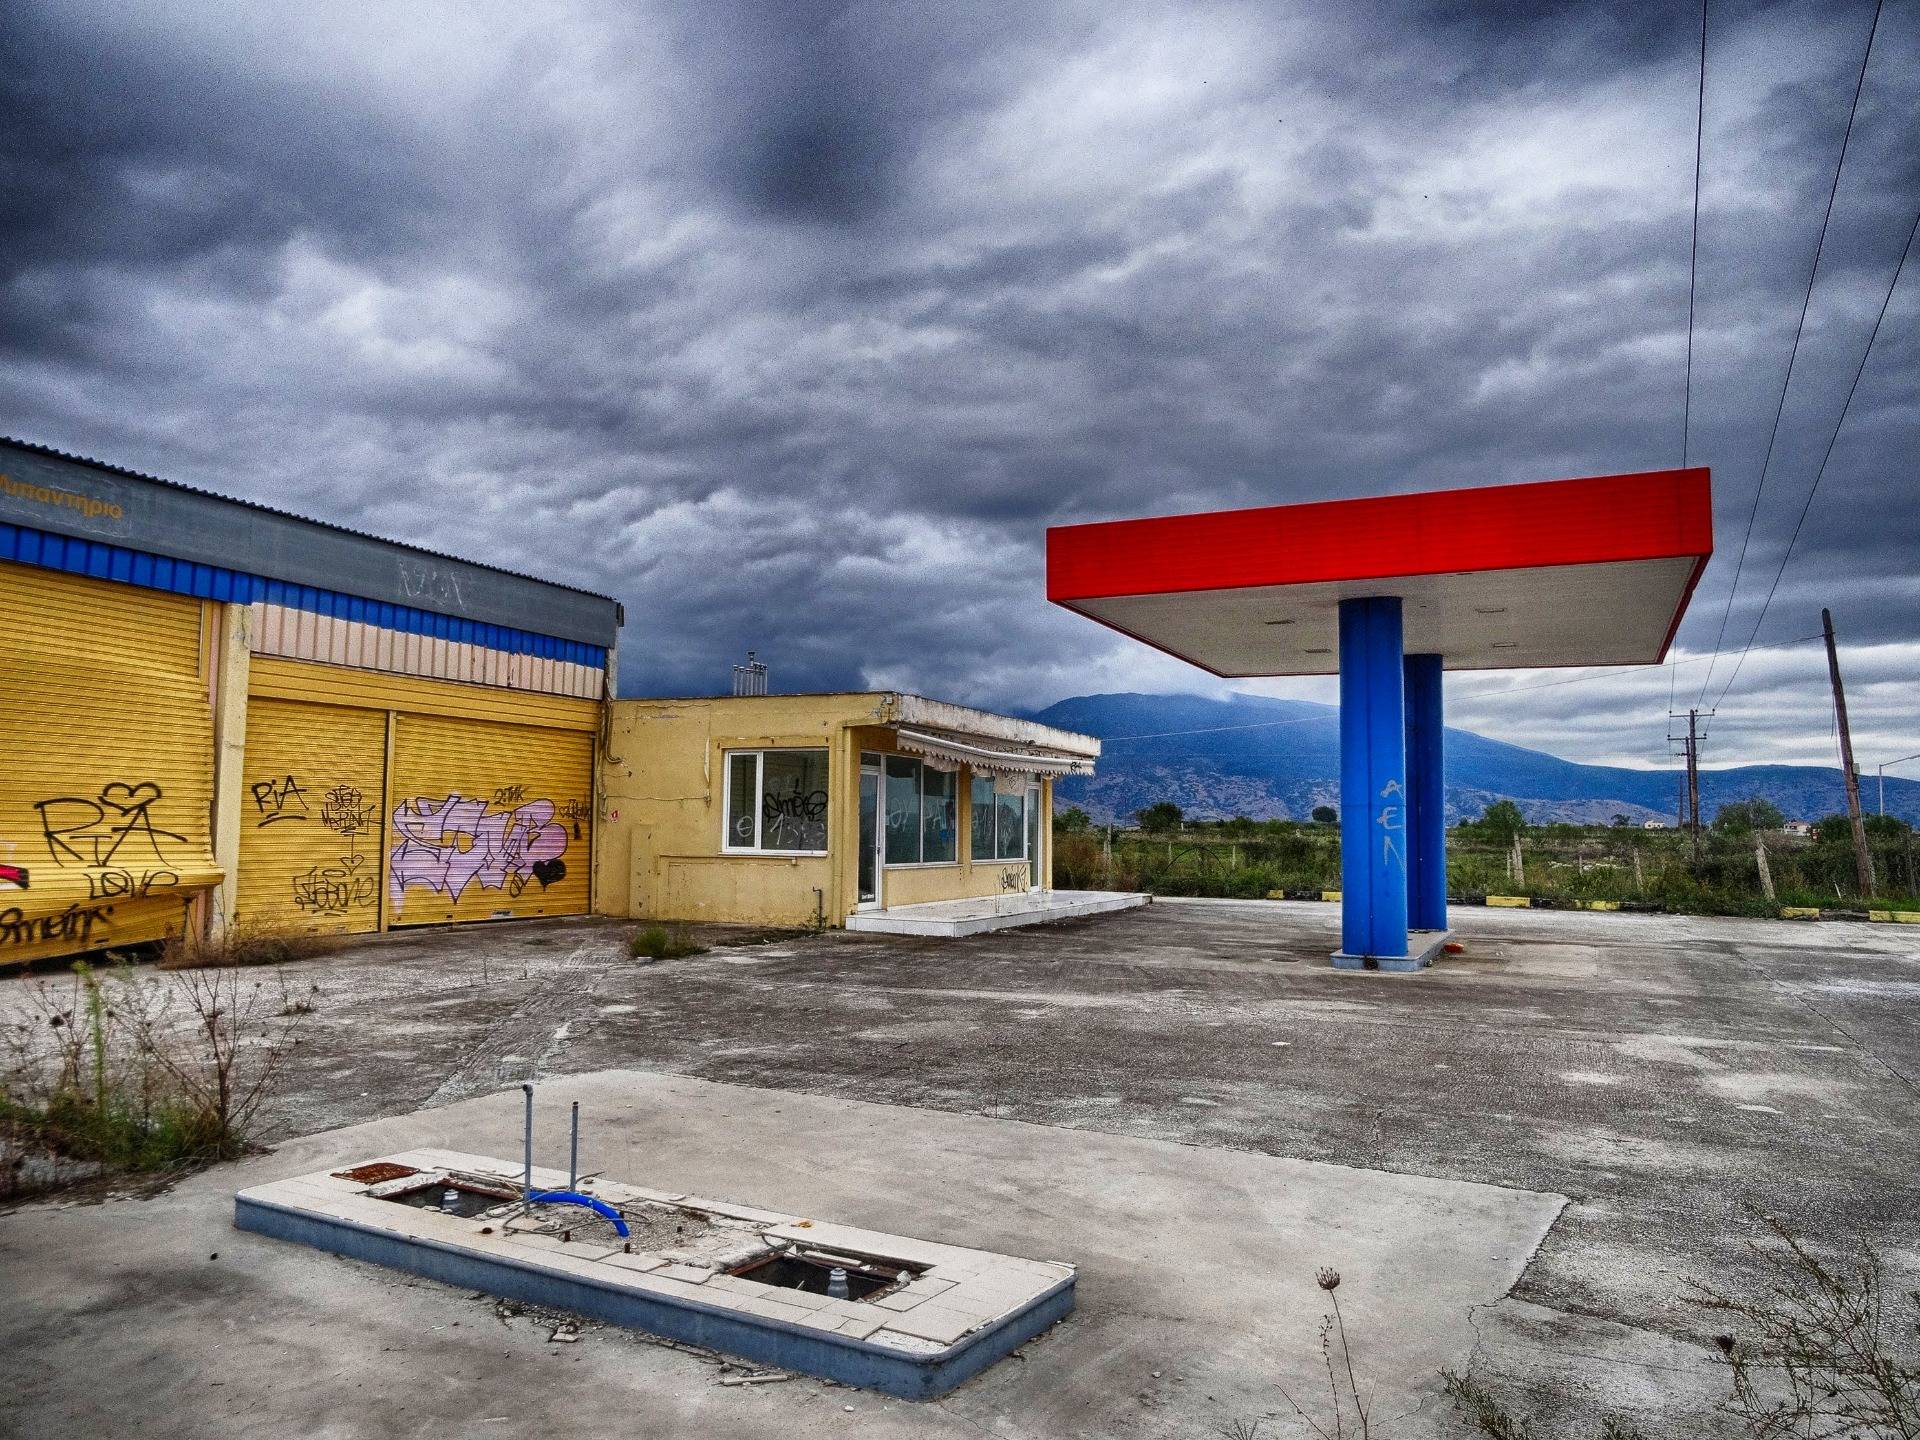 A gas station, modern art of dying